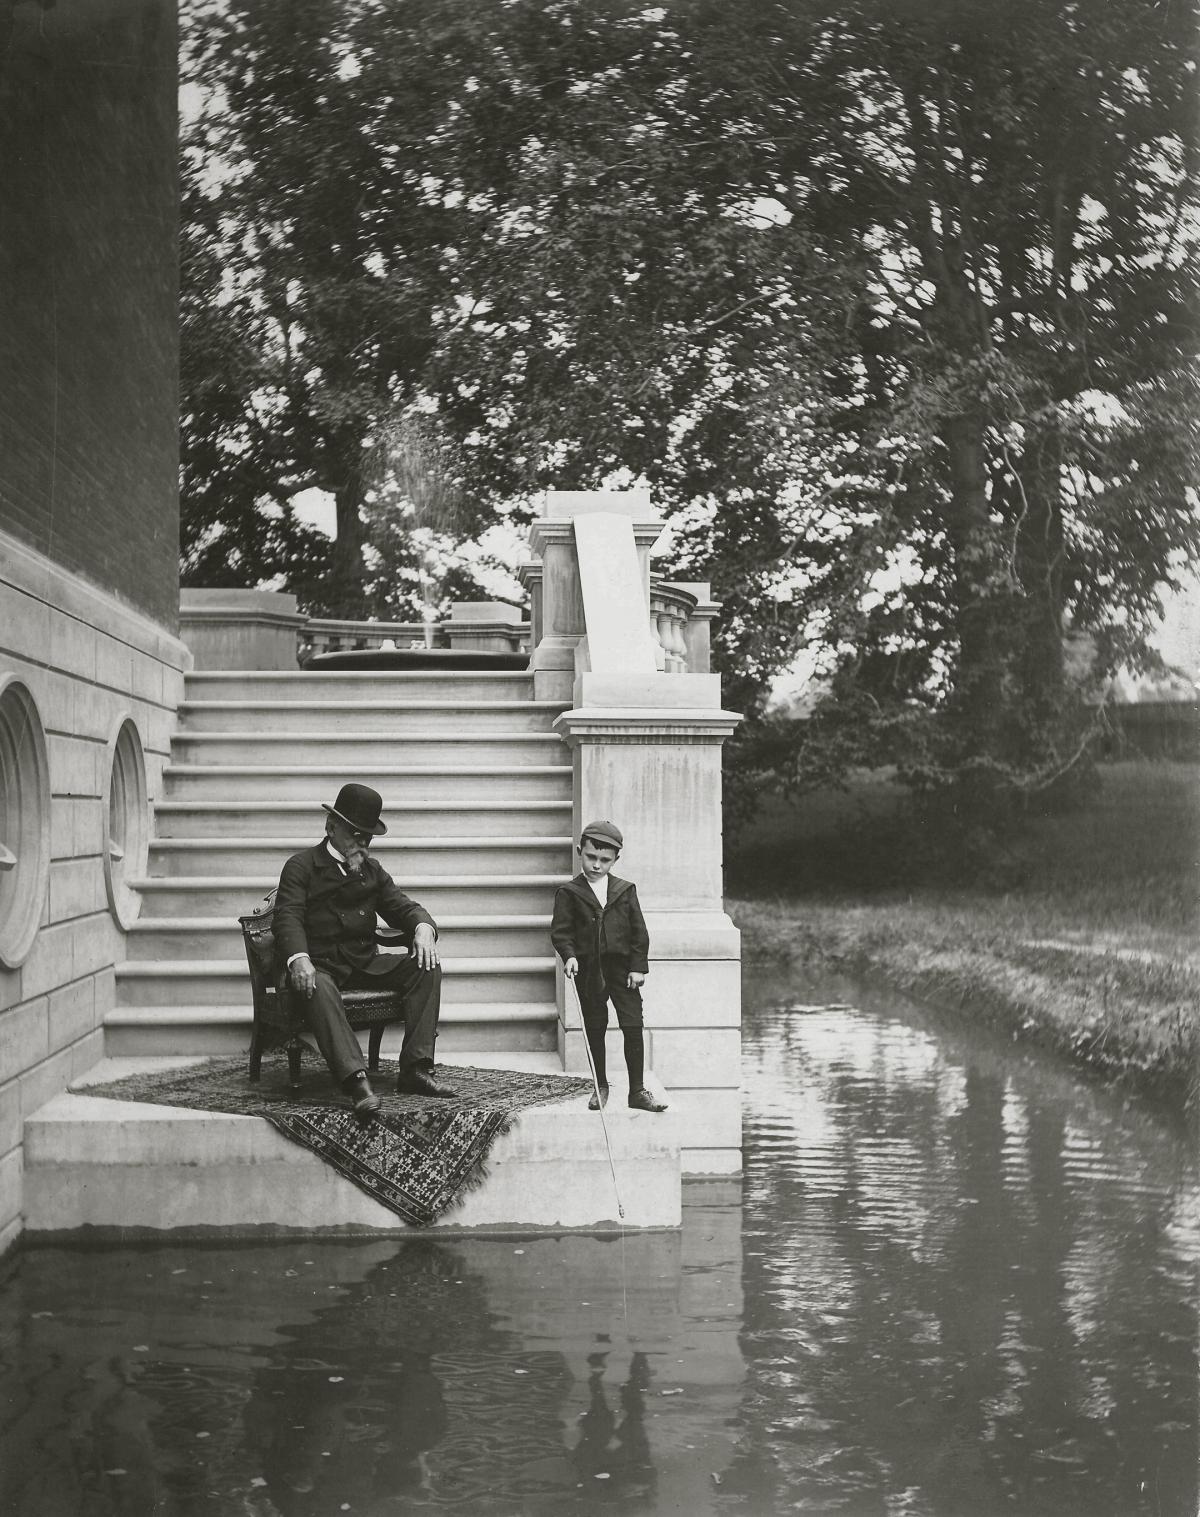 Wallace, in a bowler hat and dark suit, sits on a chair and looks down into the moat, while his grandson dips a short pole into the water